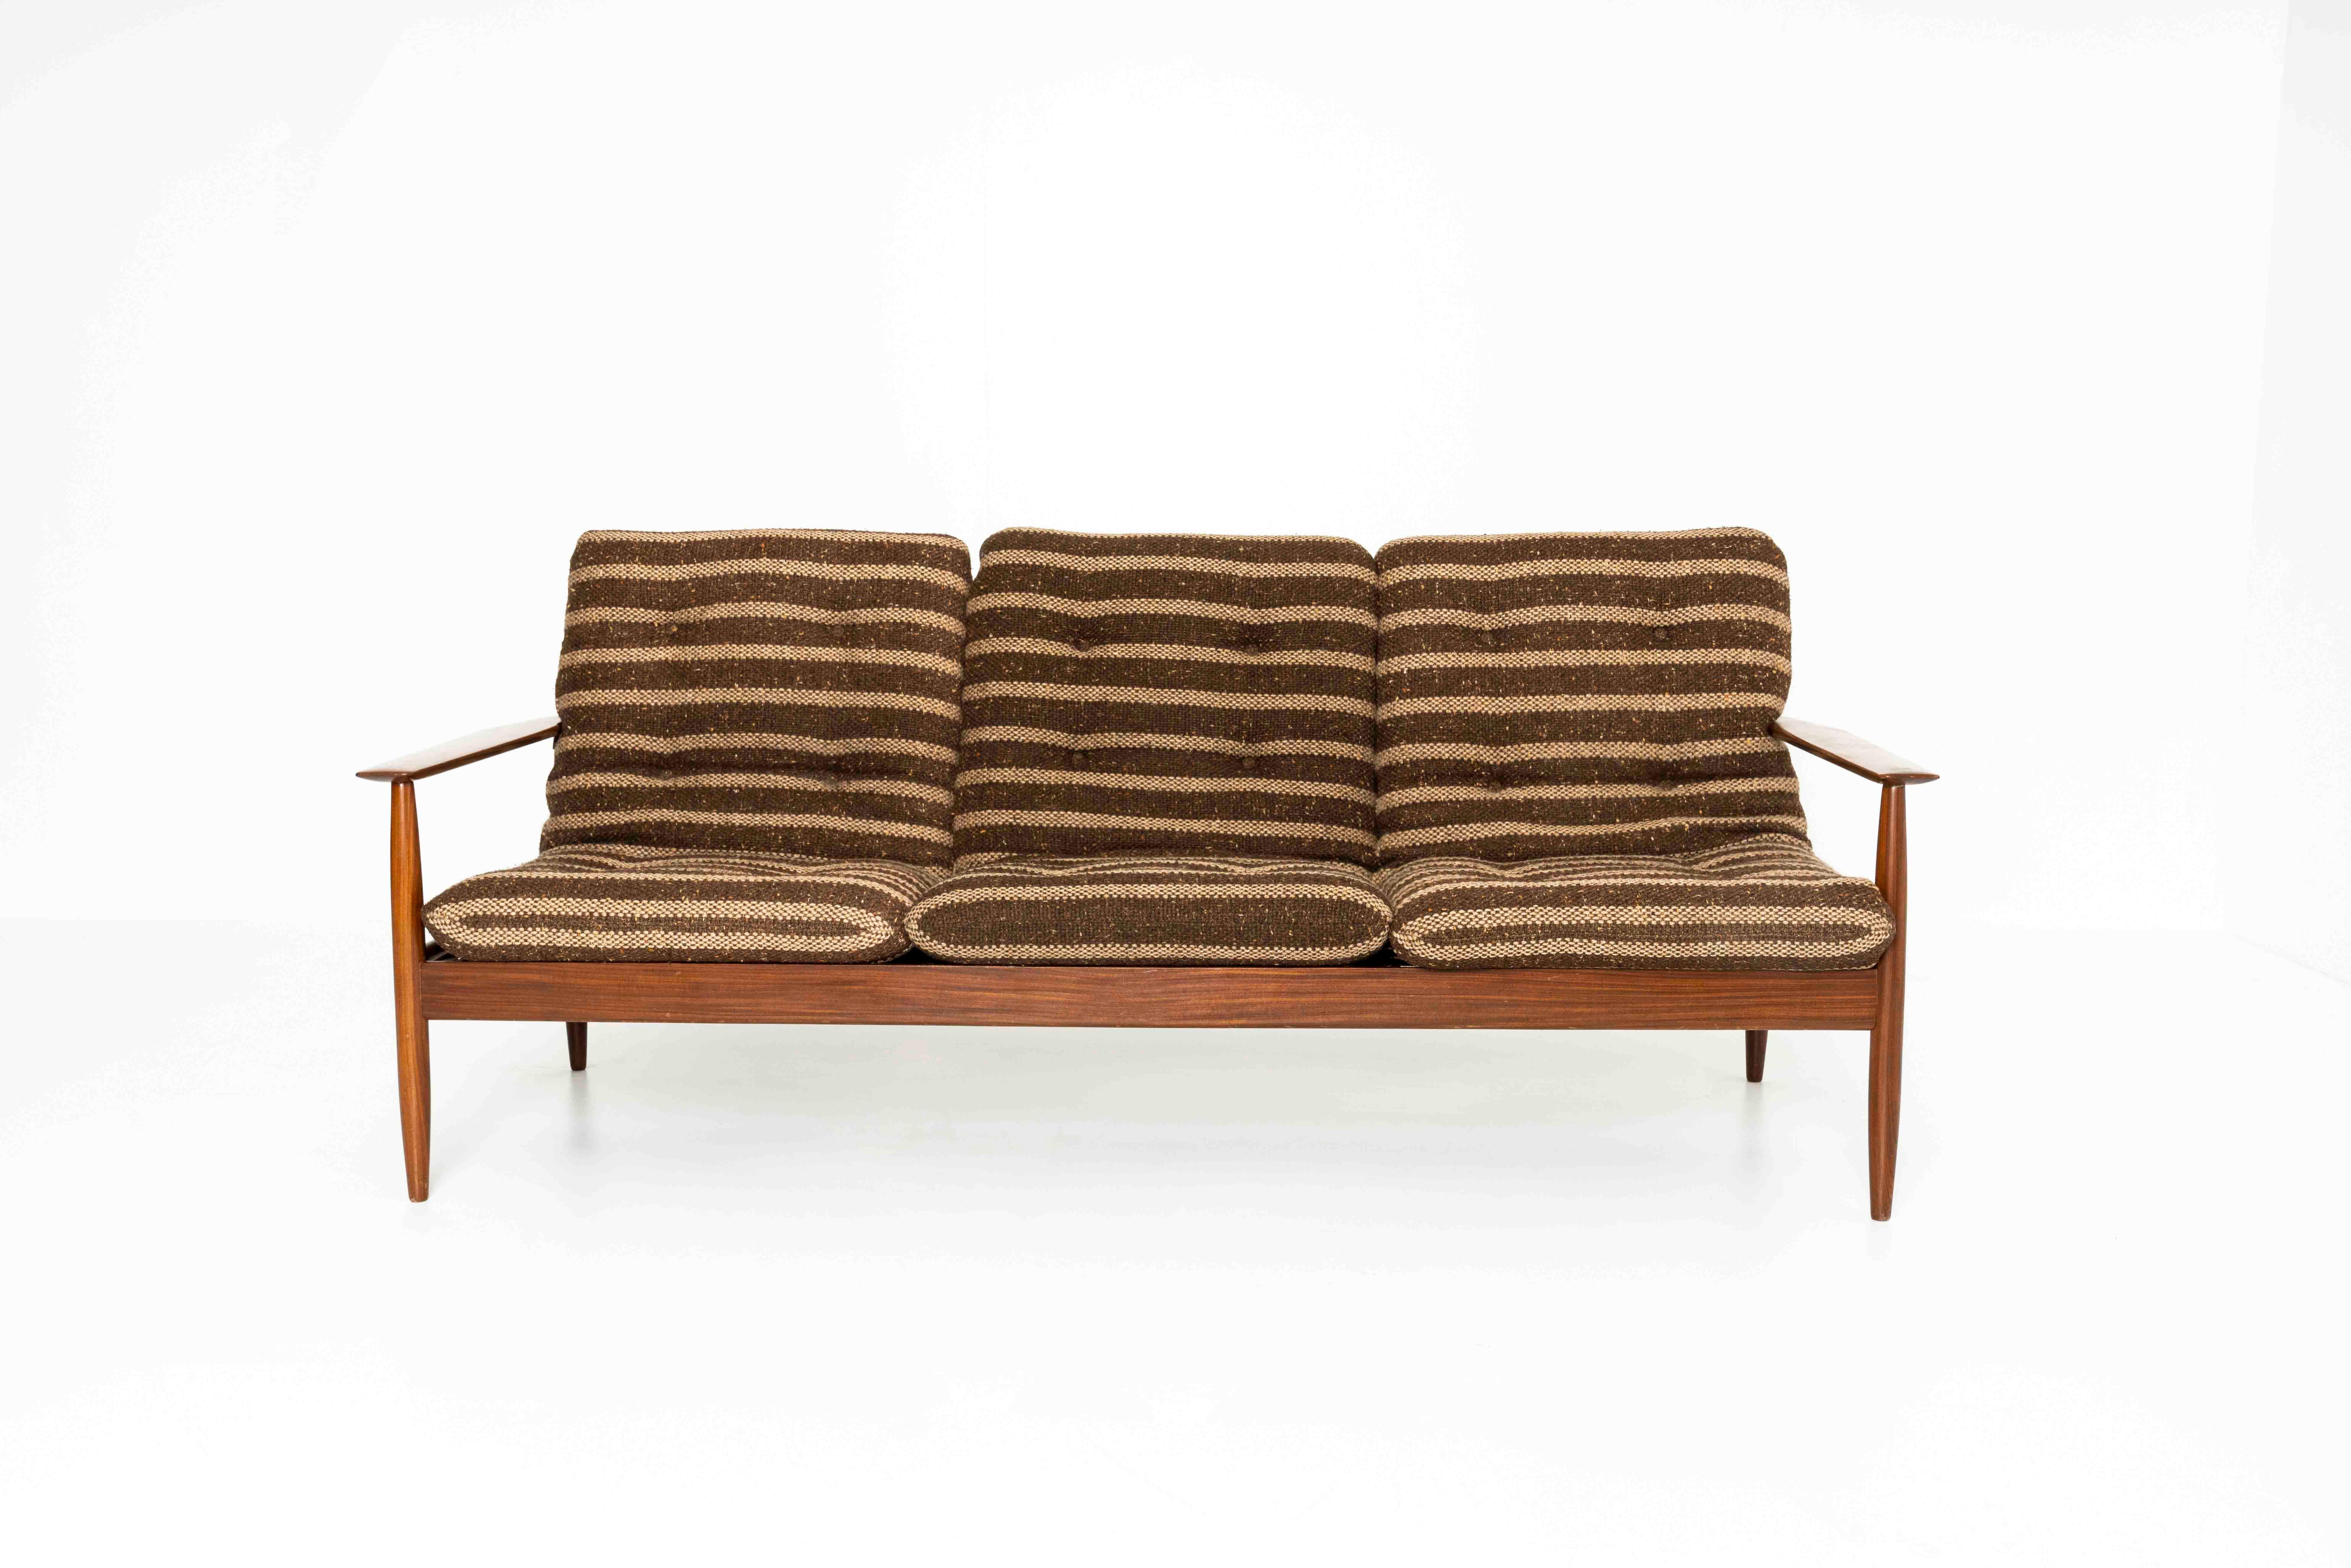 Lovely Vintage Danish Sofa in Teak Wood and Brass from Denmark 1960s. This sofa is very much in the style of Grete Jalk. The set has the original upholstery with three cushions in brown and off-white. The brass knobs are a beautiful detail to this